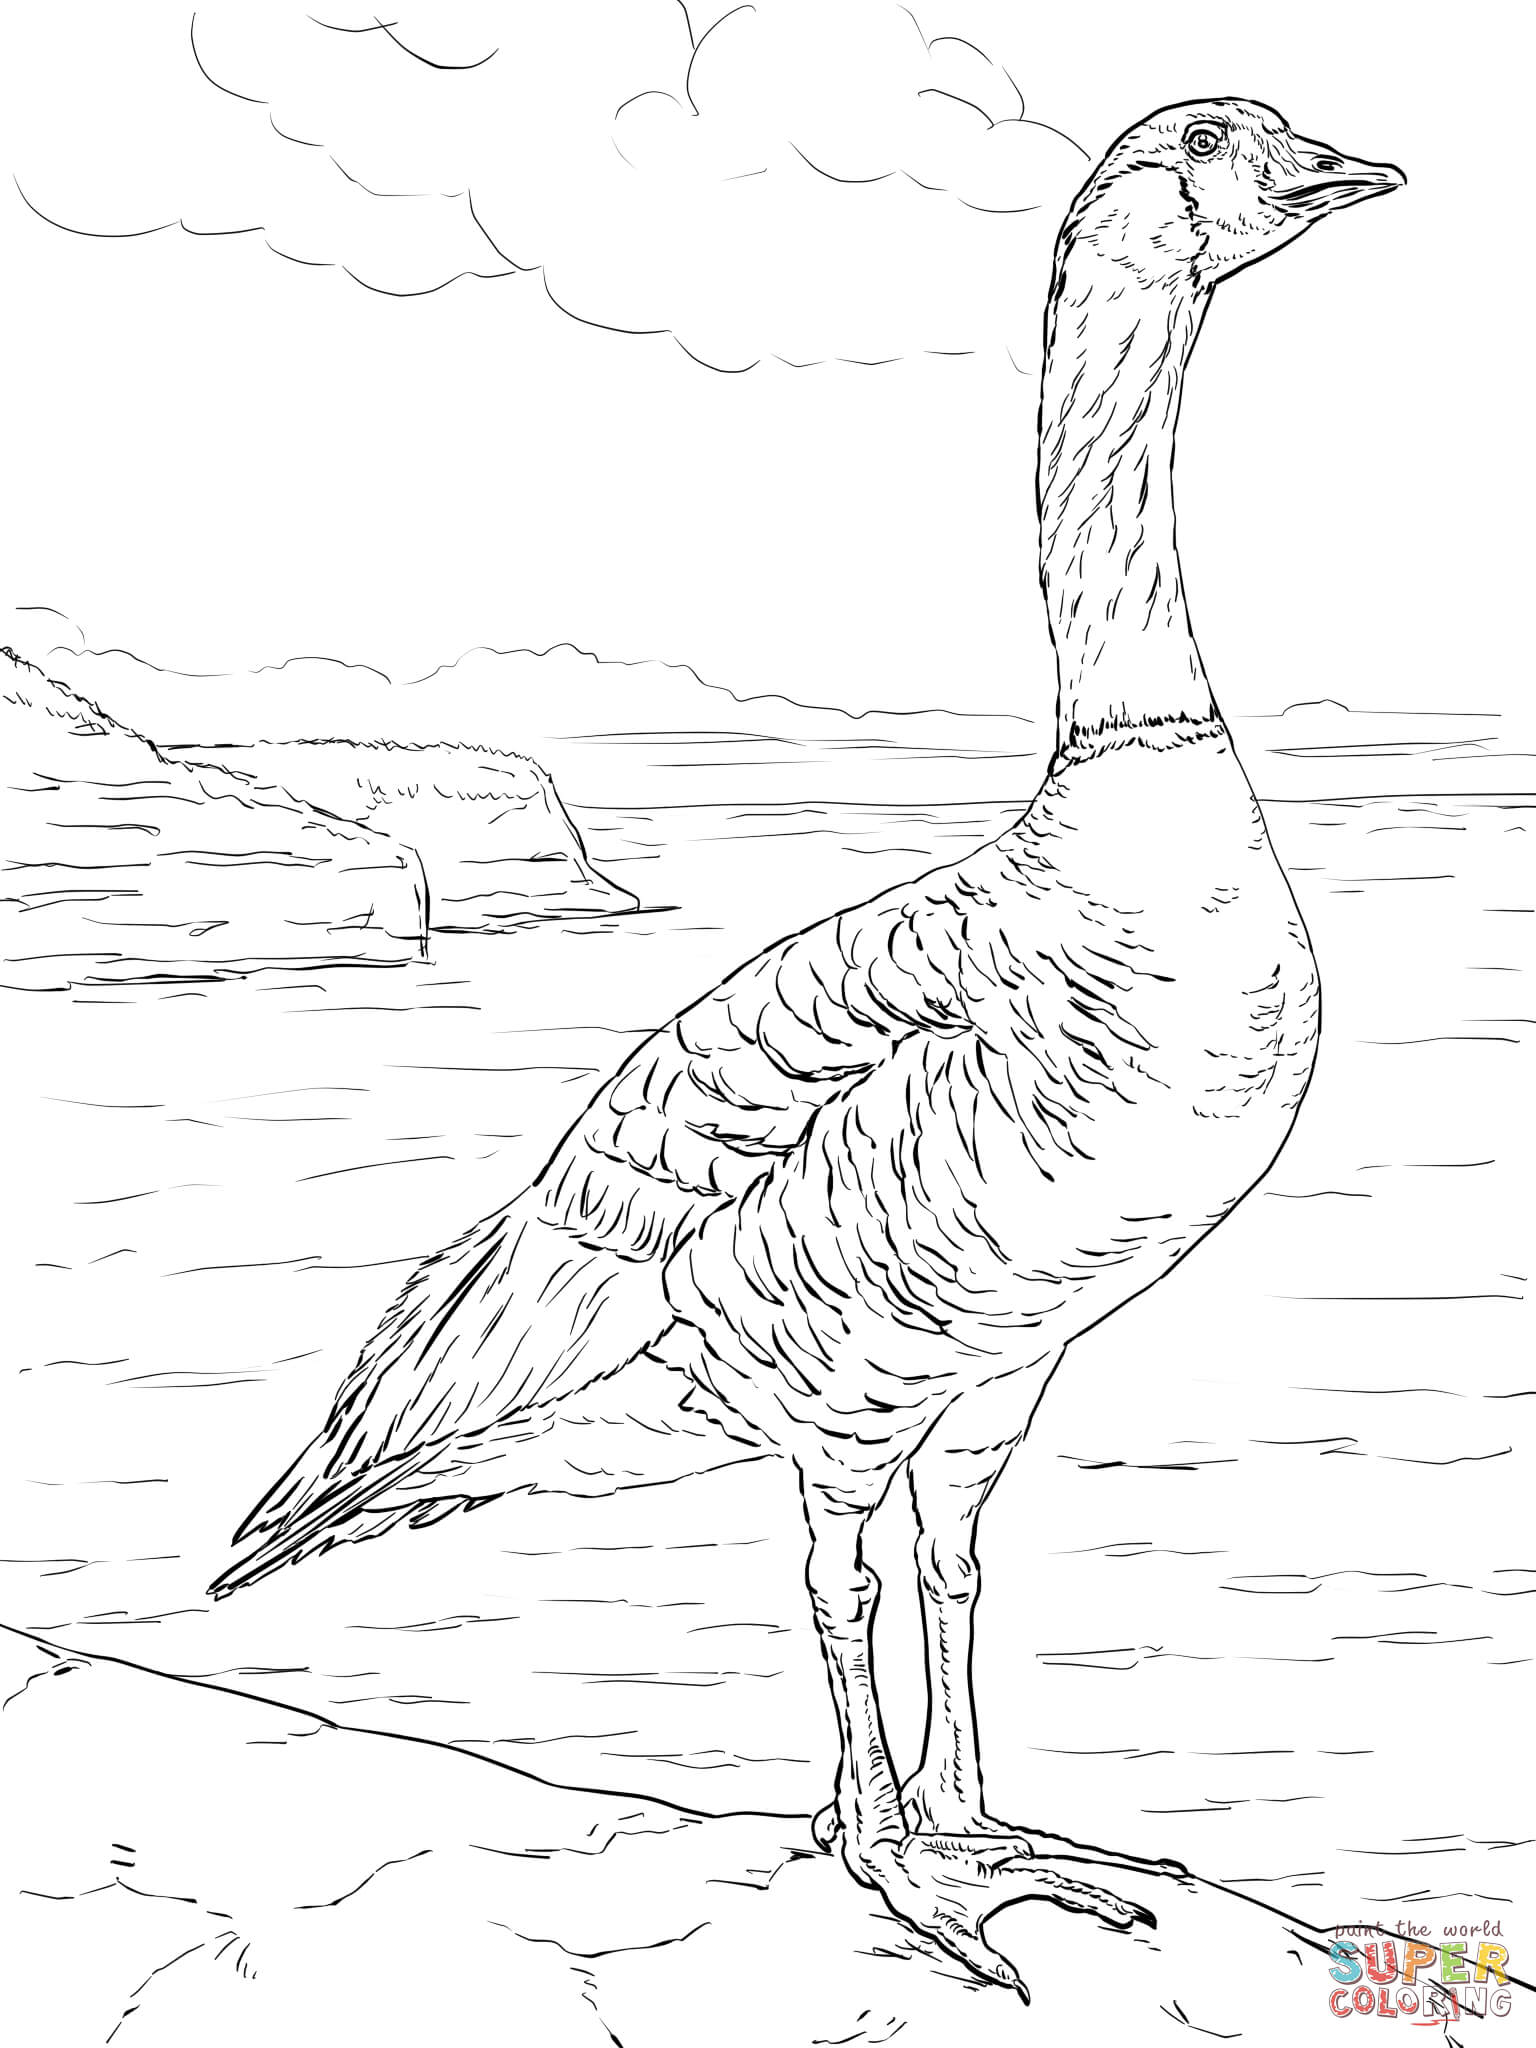 New Goose Coloring Page for Adult